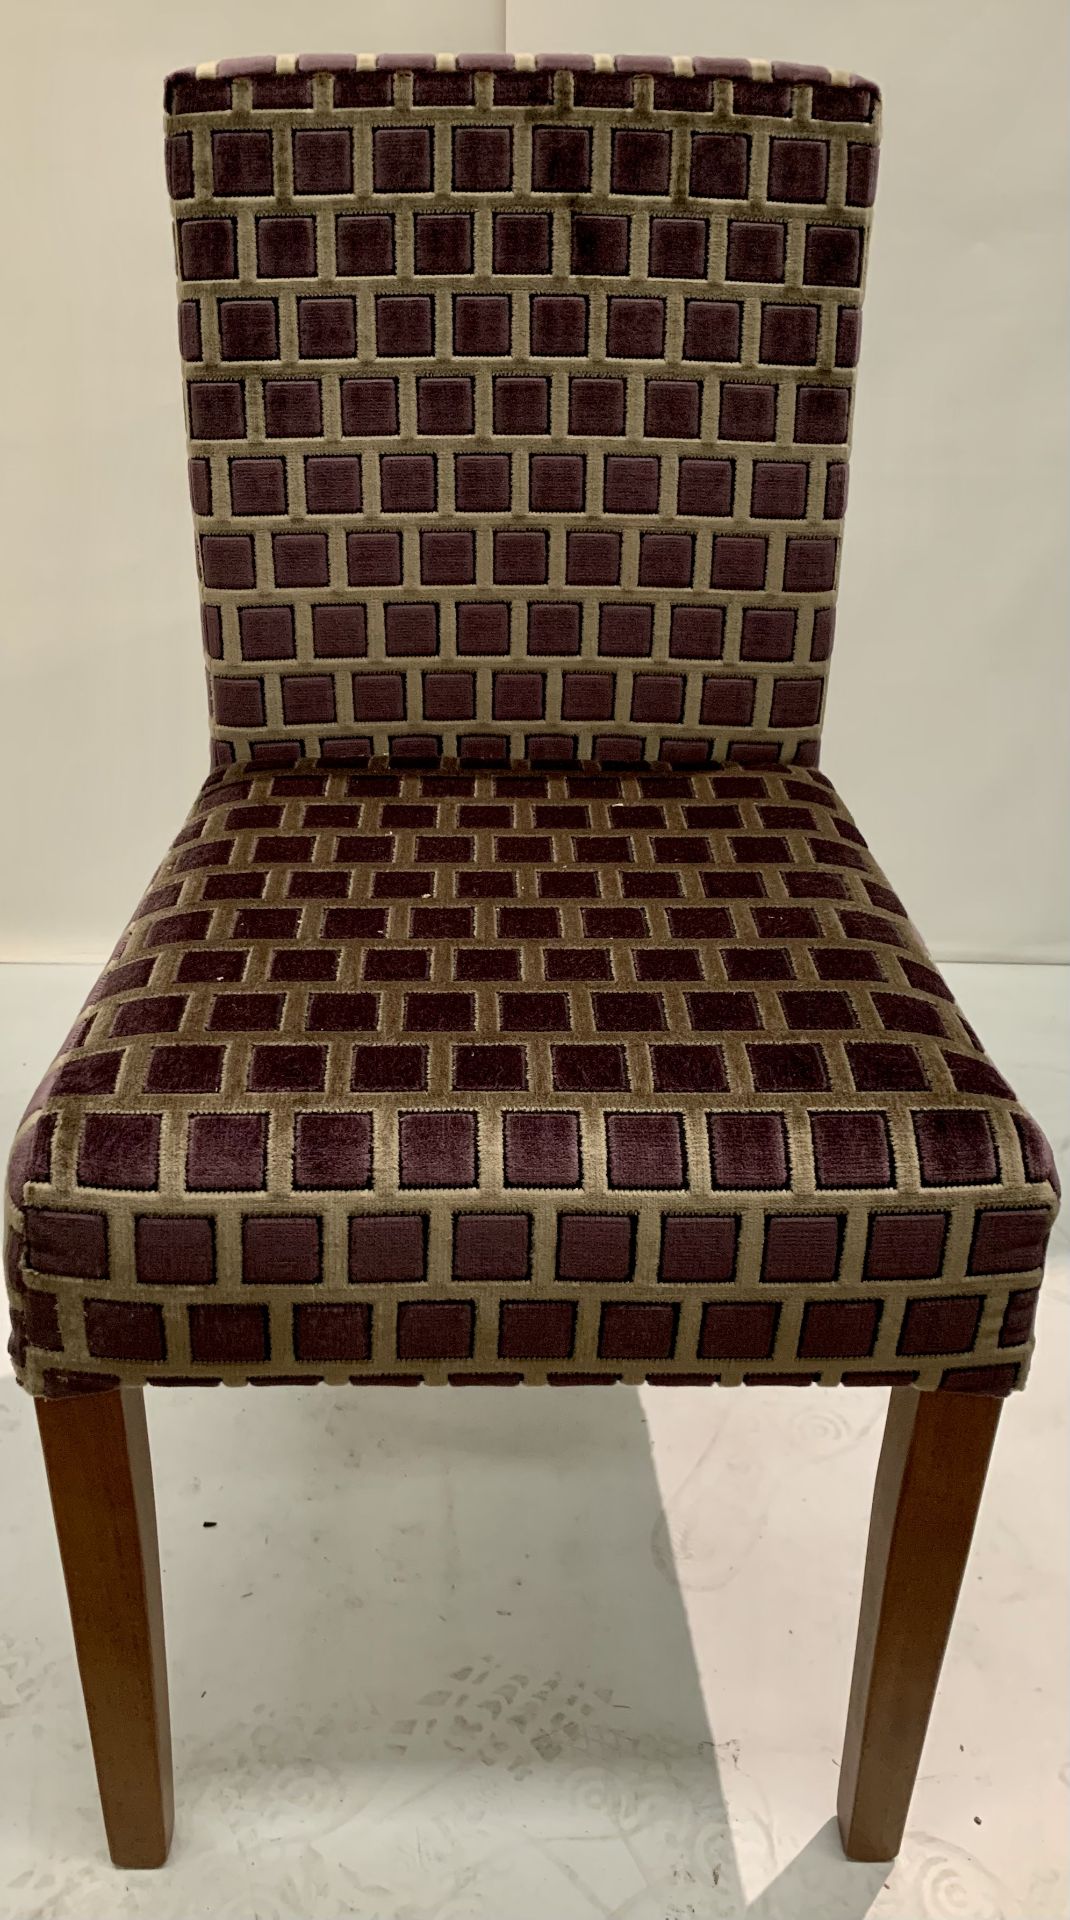 A velor purple square pattern upholstered dining chair - (1 outer box)